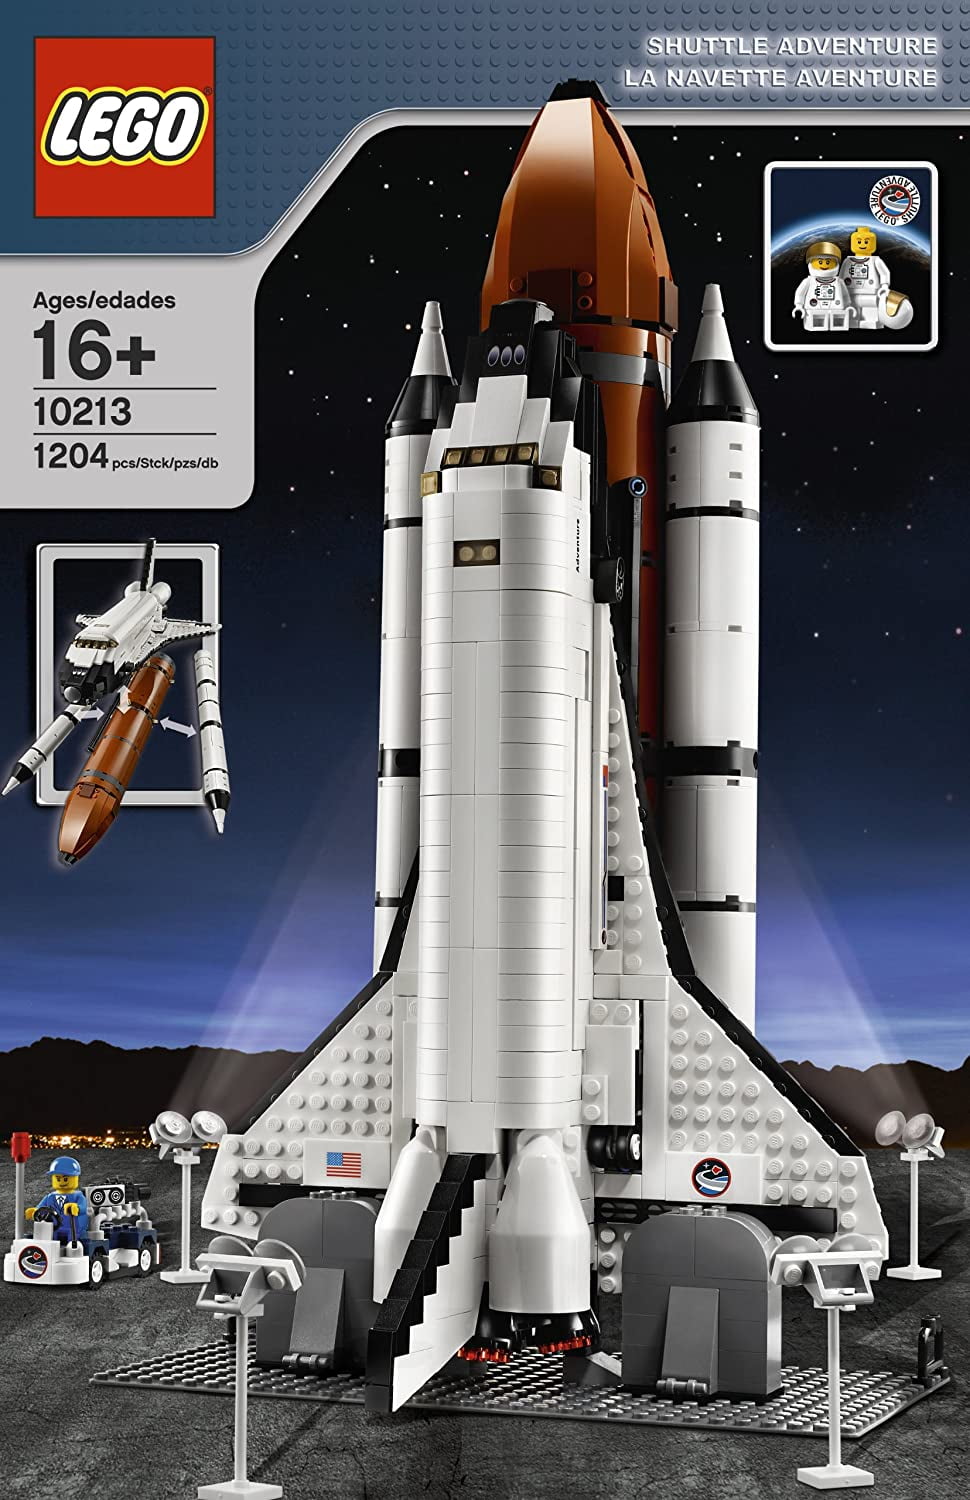 Lego 10231 Shuttle expeditions NEW